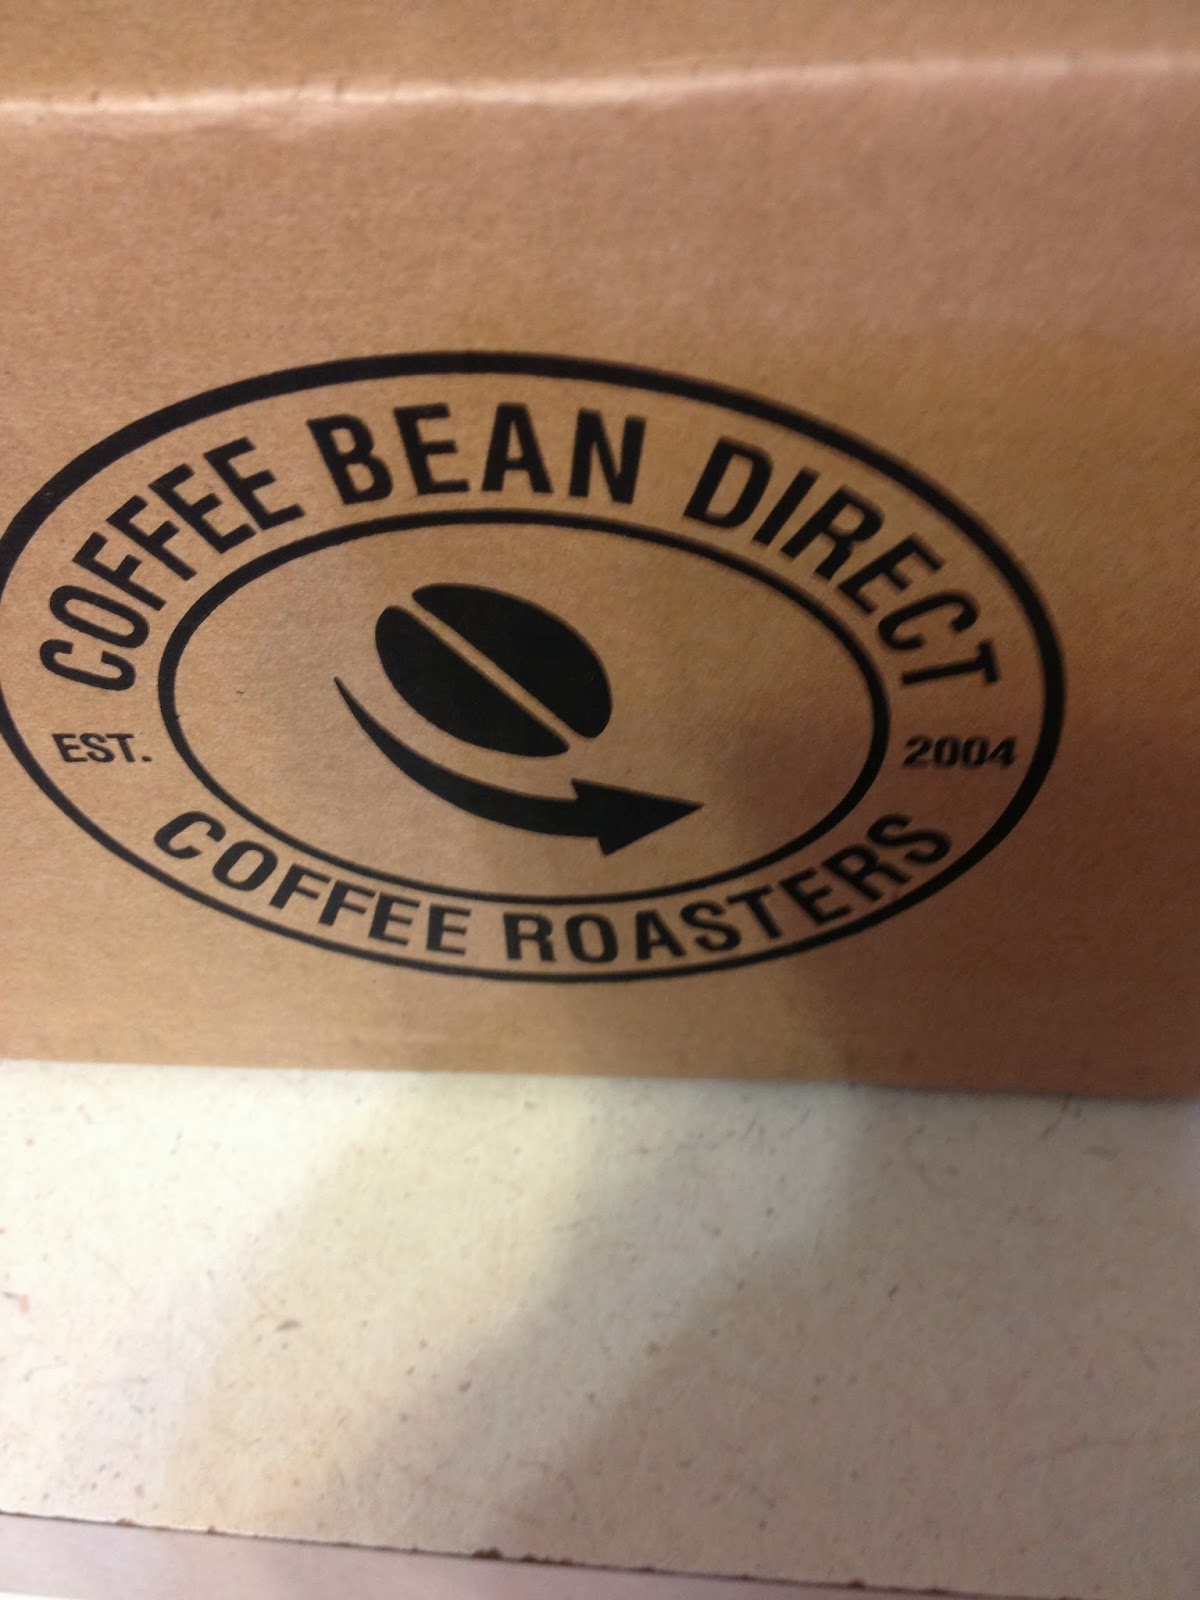 FL Mom's blog!: Coffee Bean Direct (Review and Giveaway!)